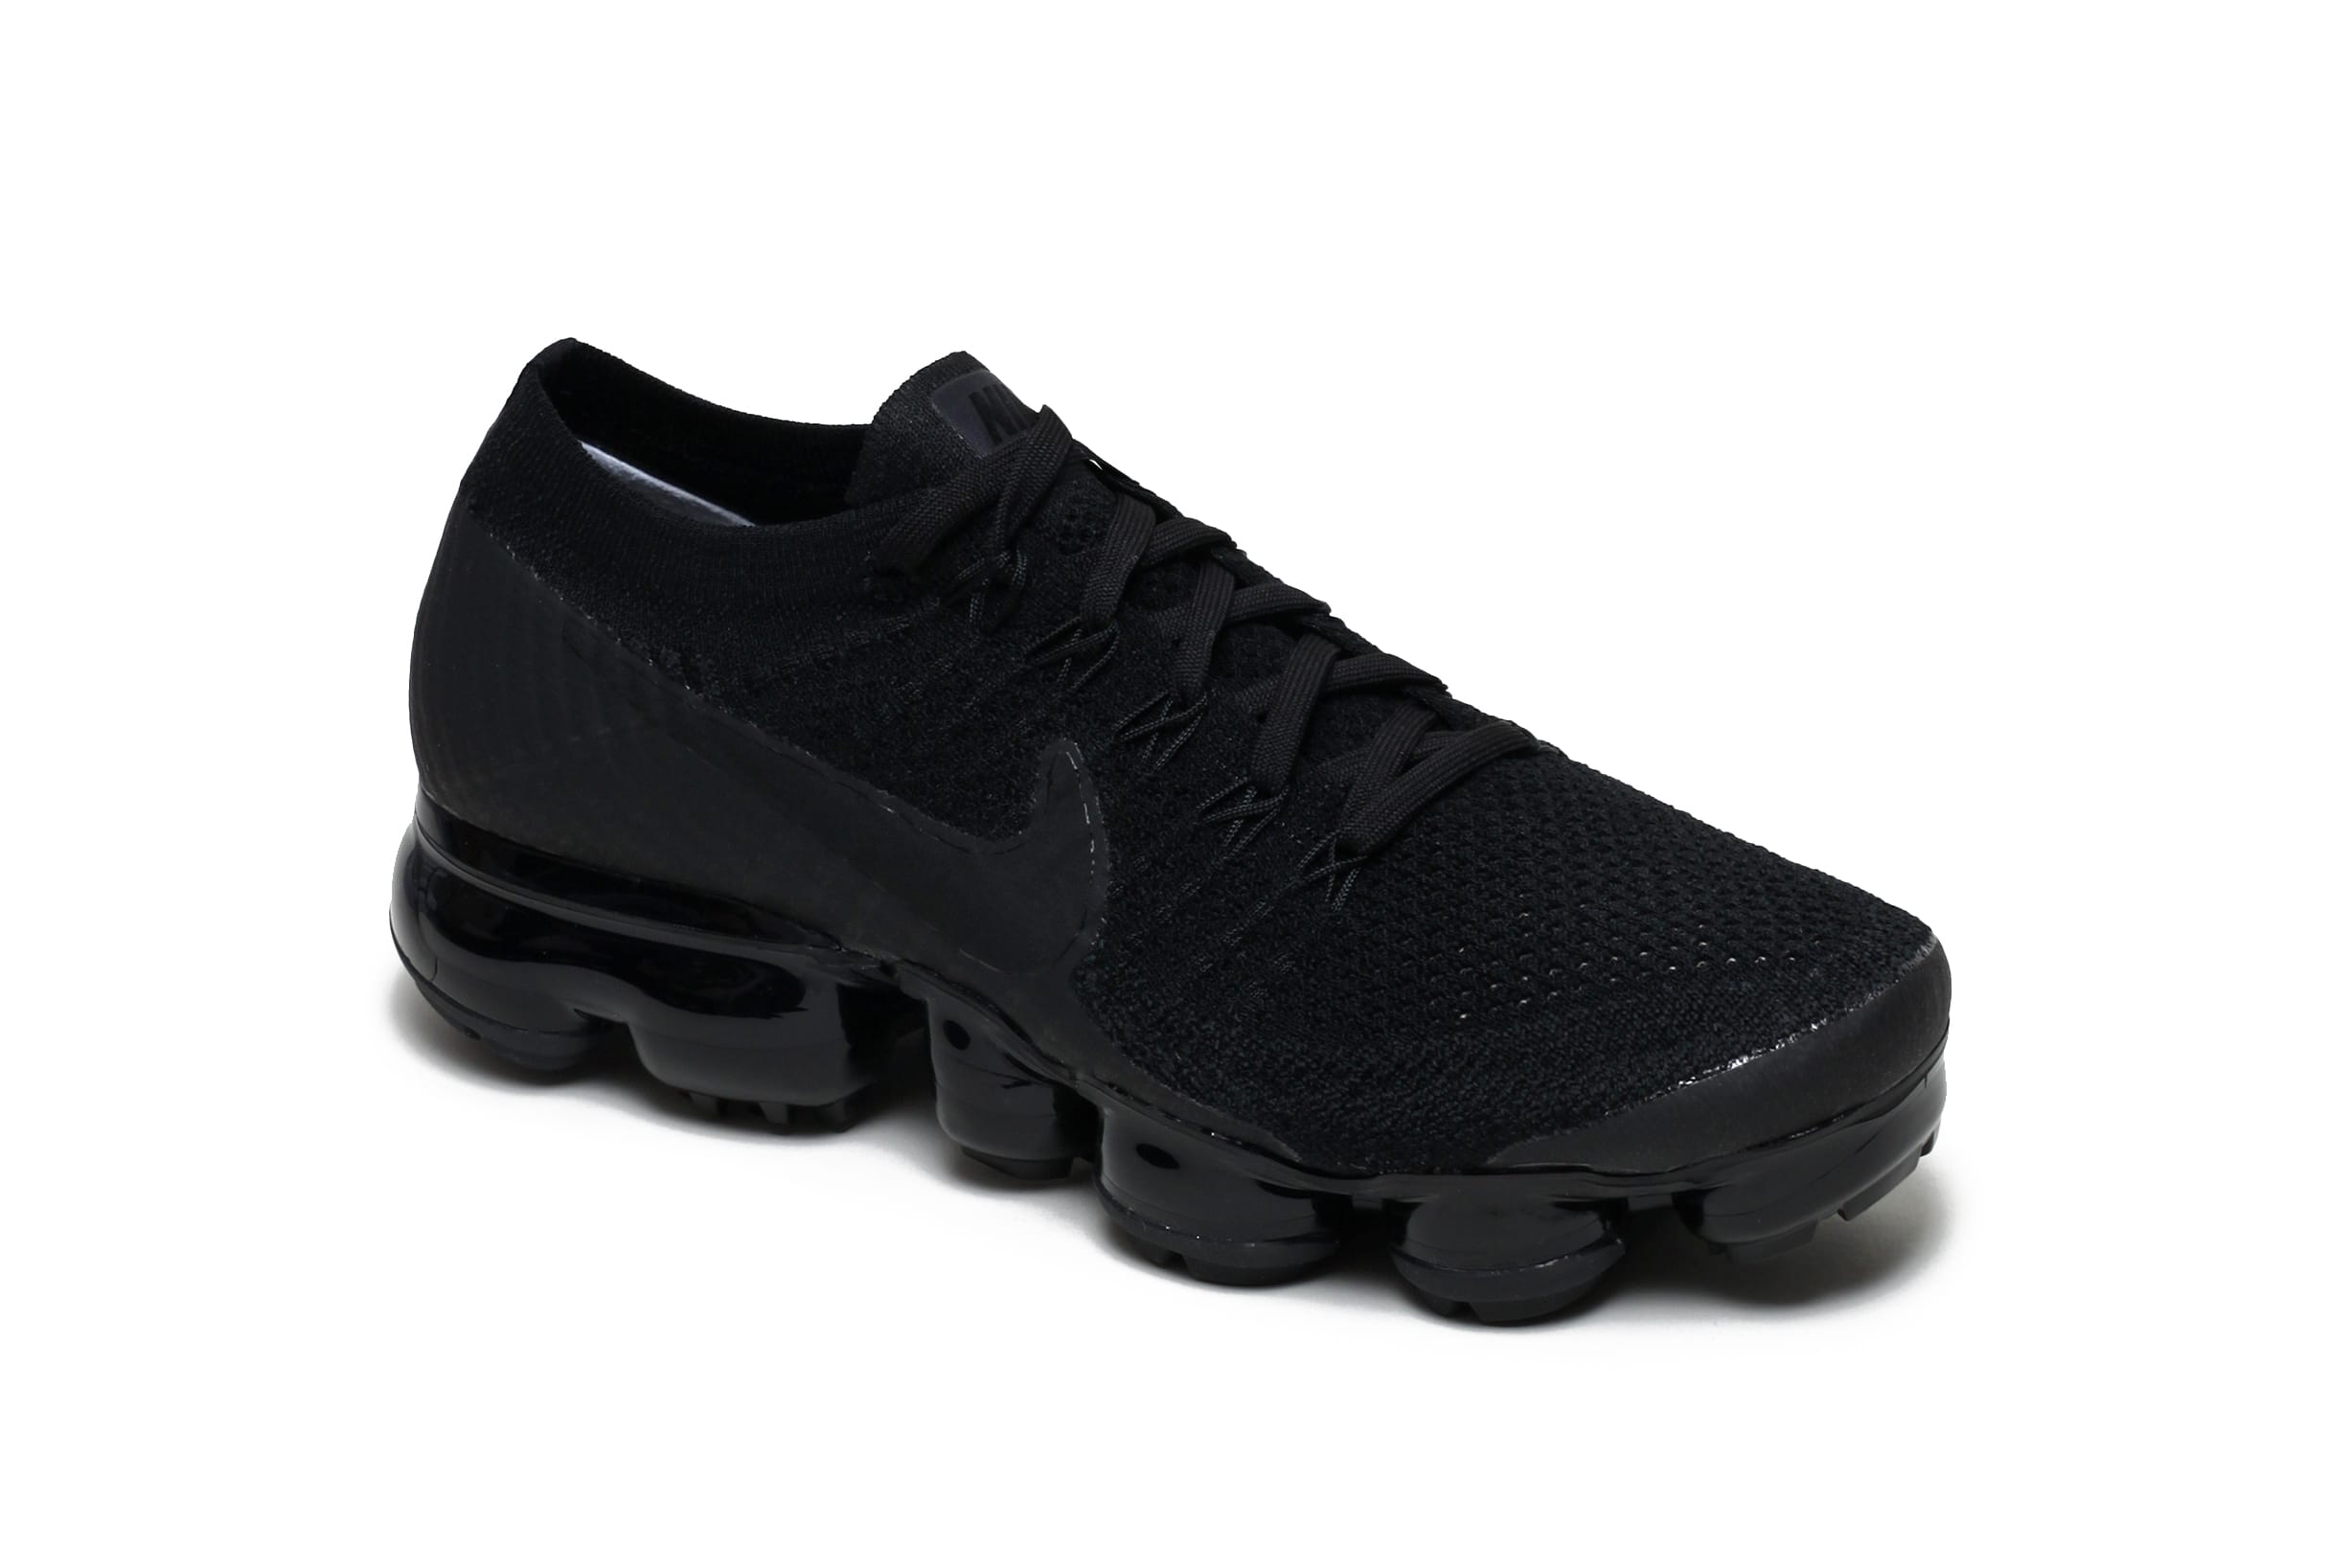 nike air vapormax flyknit black anthracite